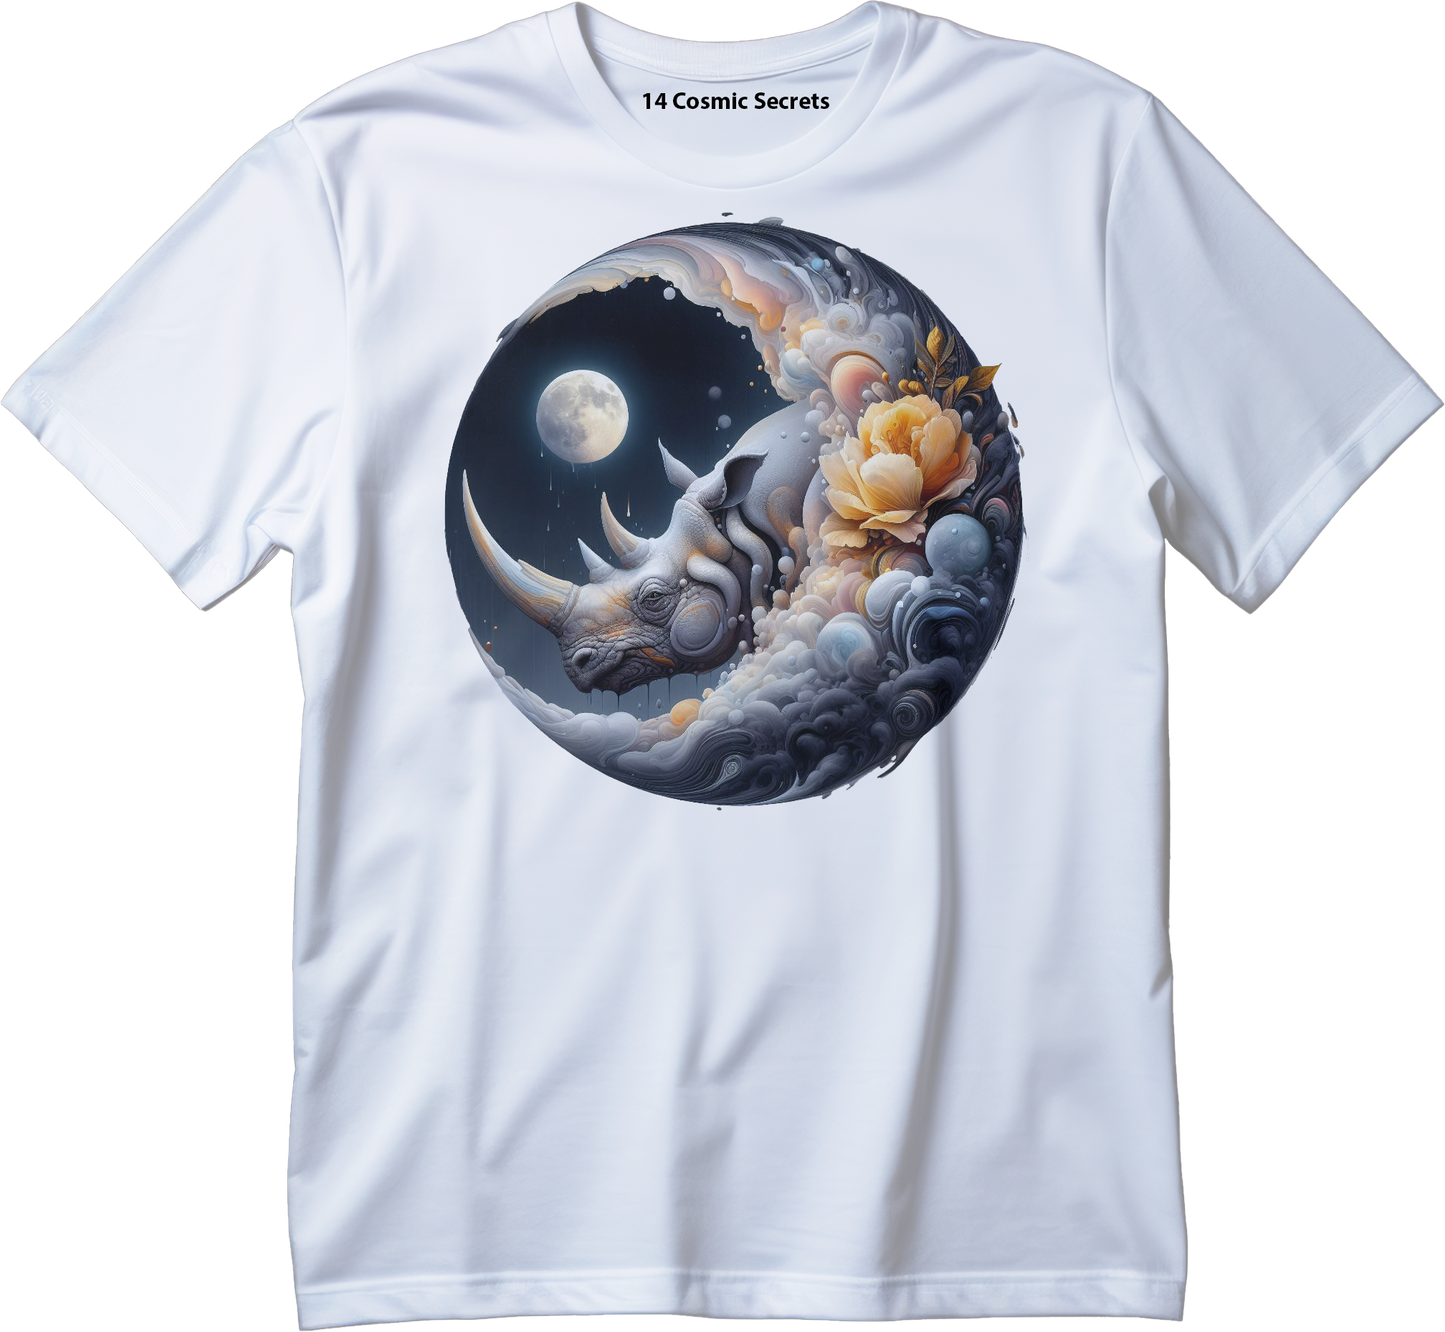 Rhino's Surreal Painting Graphic Printed T-Shirt  Cotton T-Shirt Magnificence of India T-Shirt